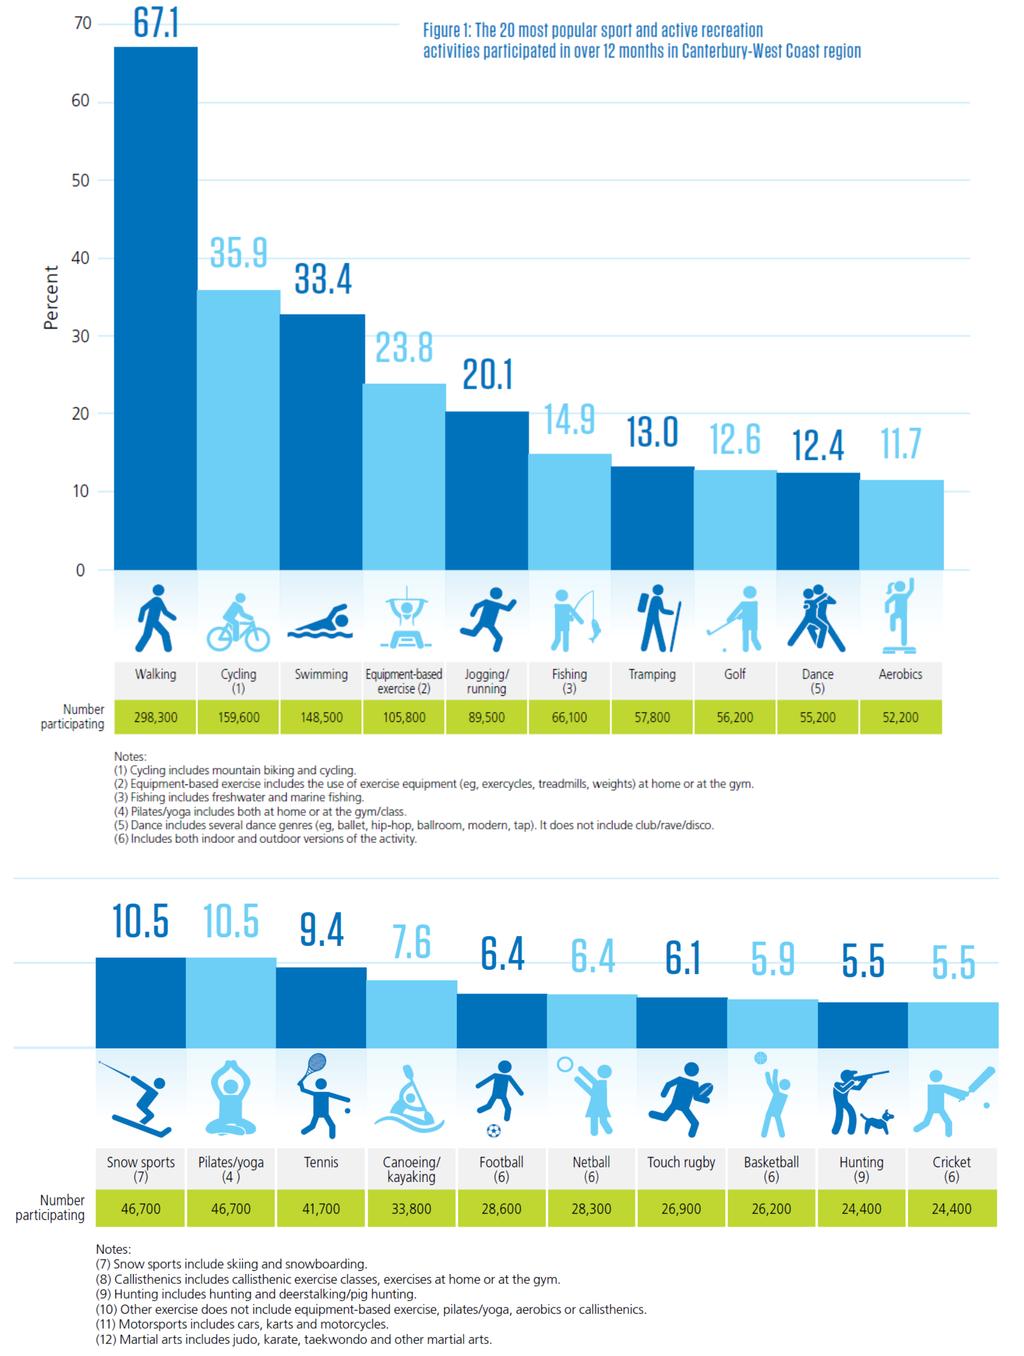 4.4 The 20 most popular sport and active recreation activities participated in over 12